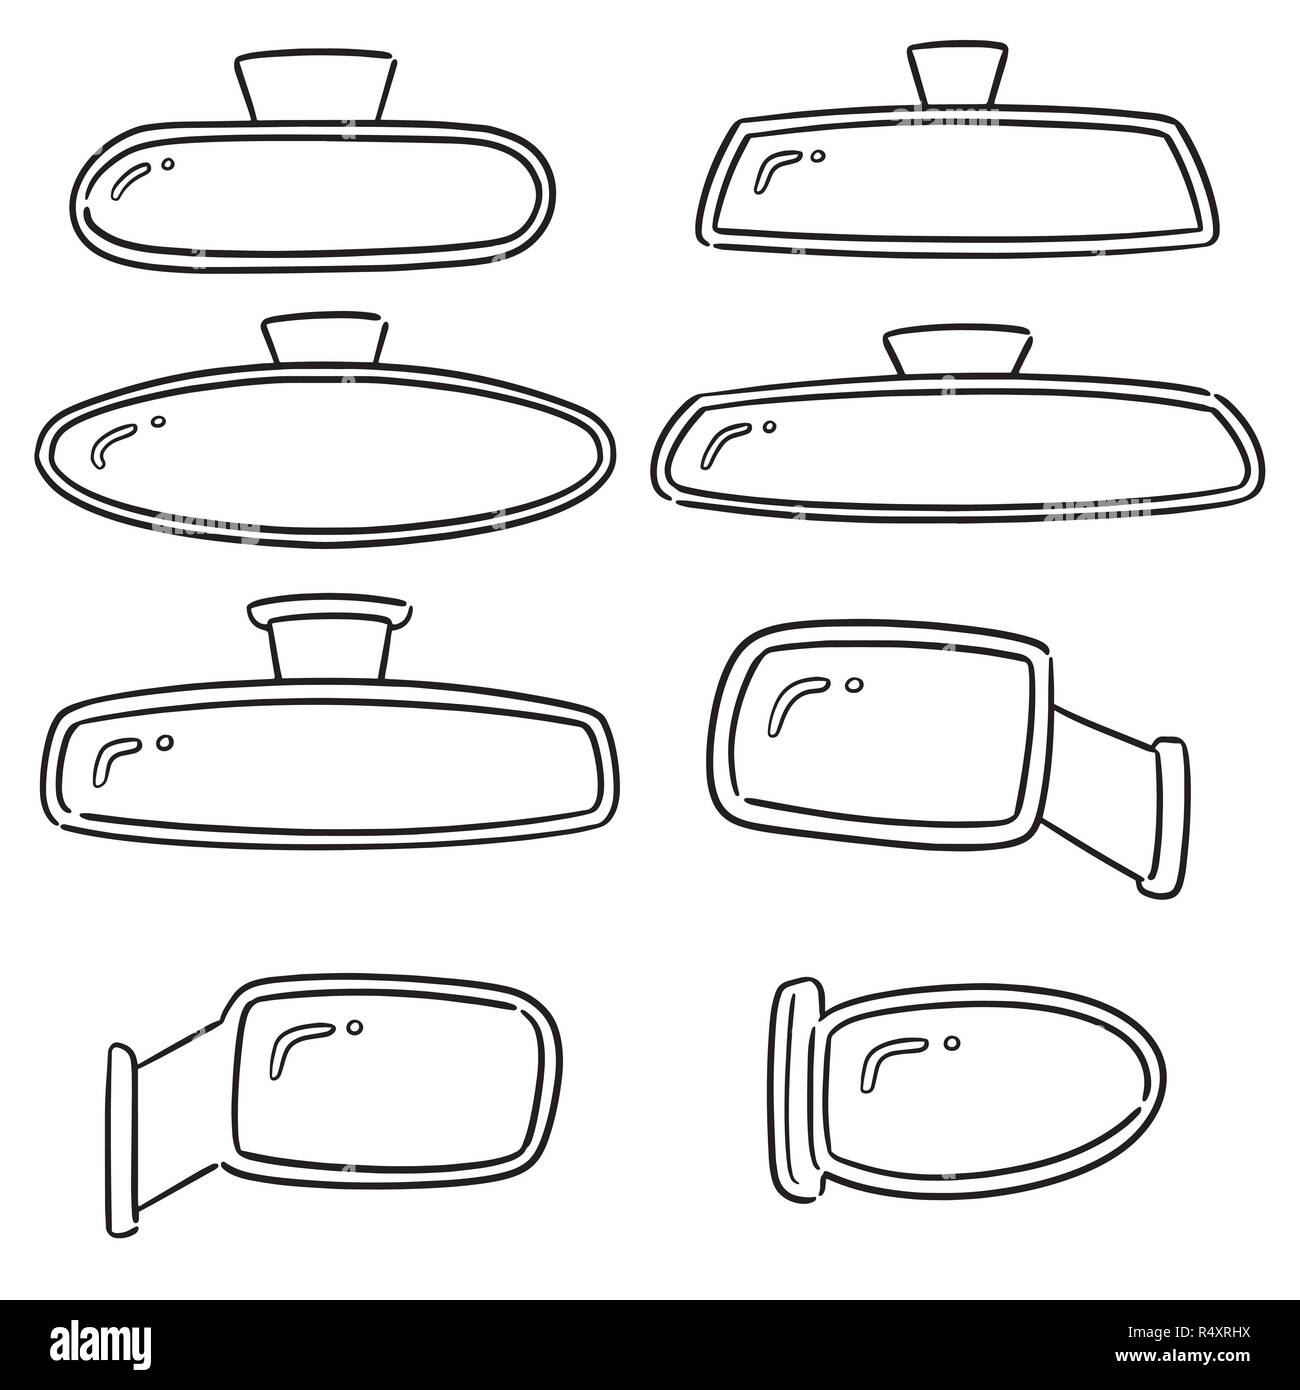 vector set of rear view mirrors Stock Vector